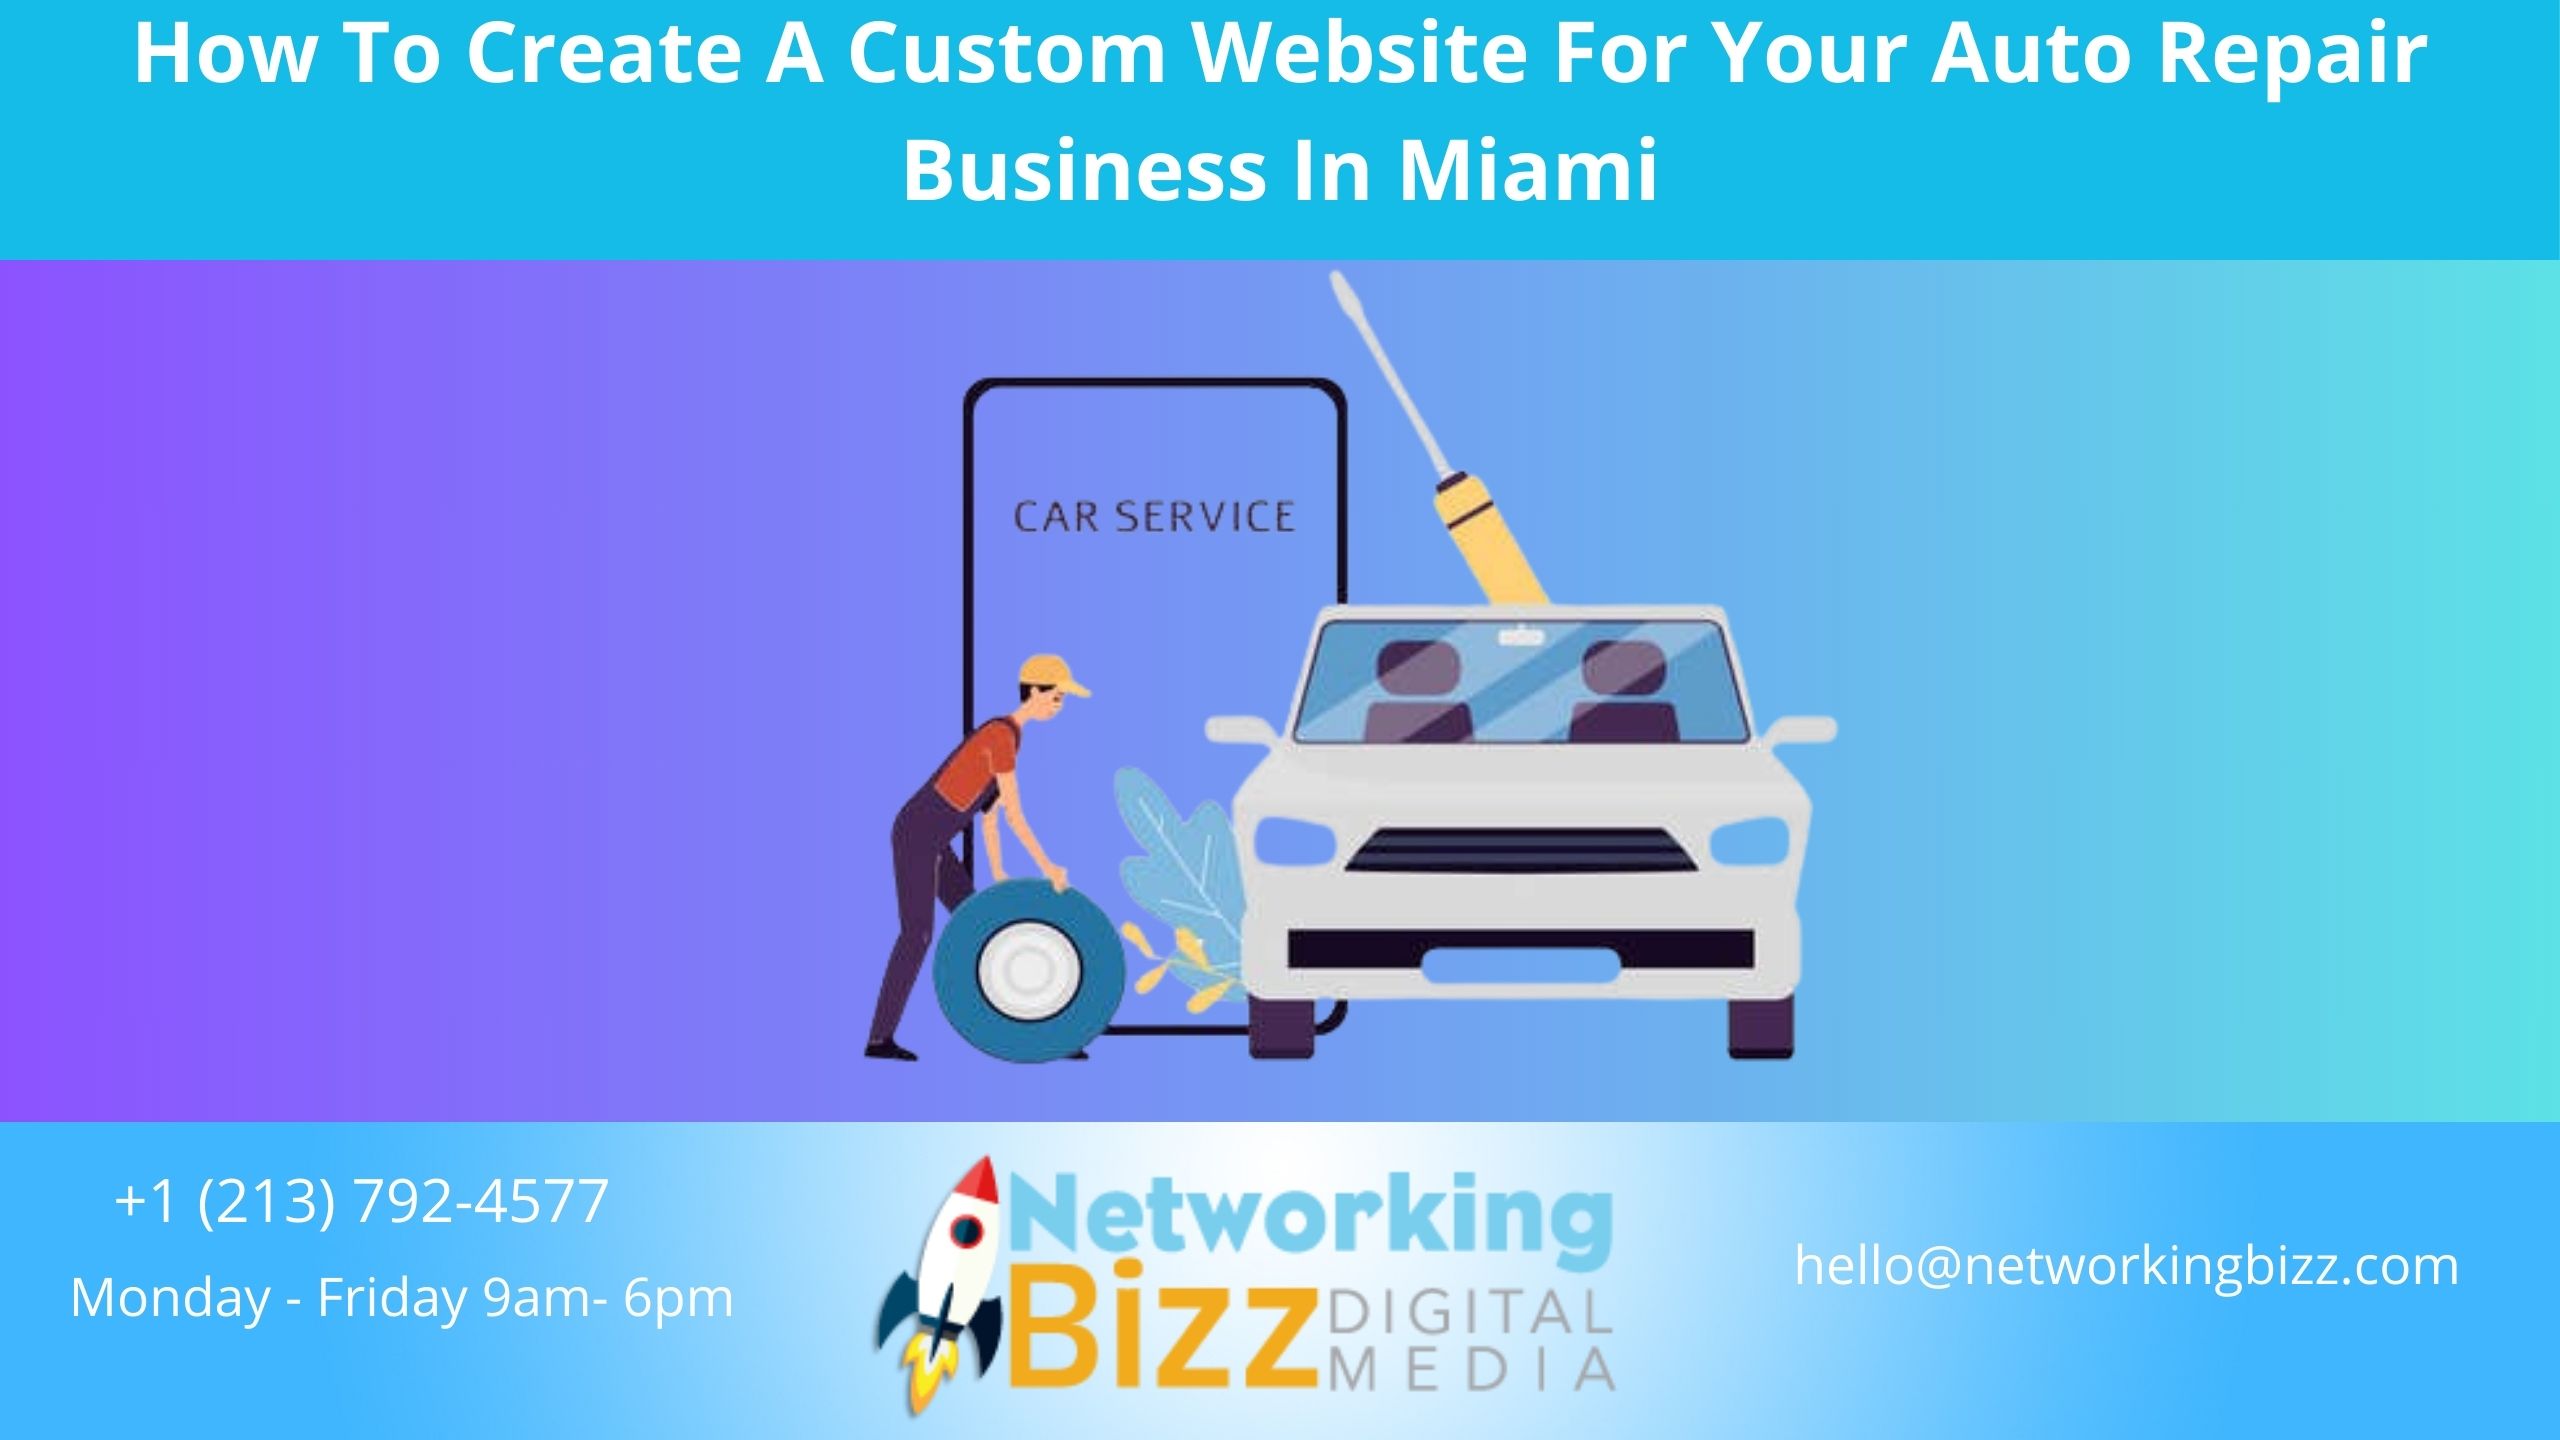 How To Create A Custom Website For Your Auto Repair Business In Miami